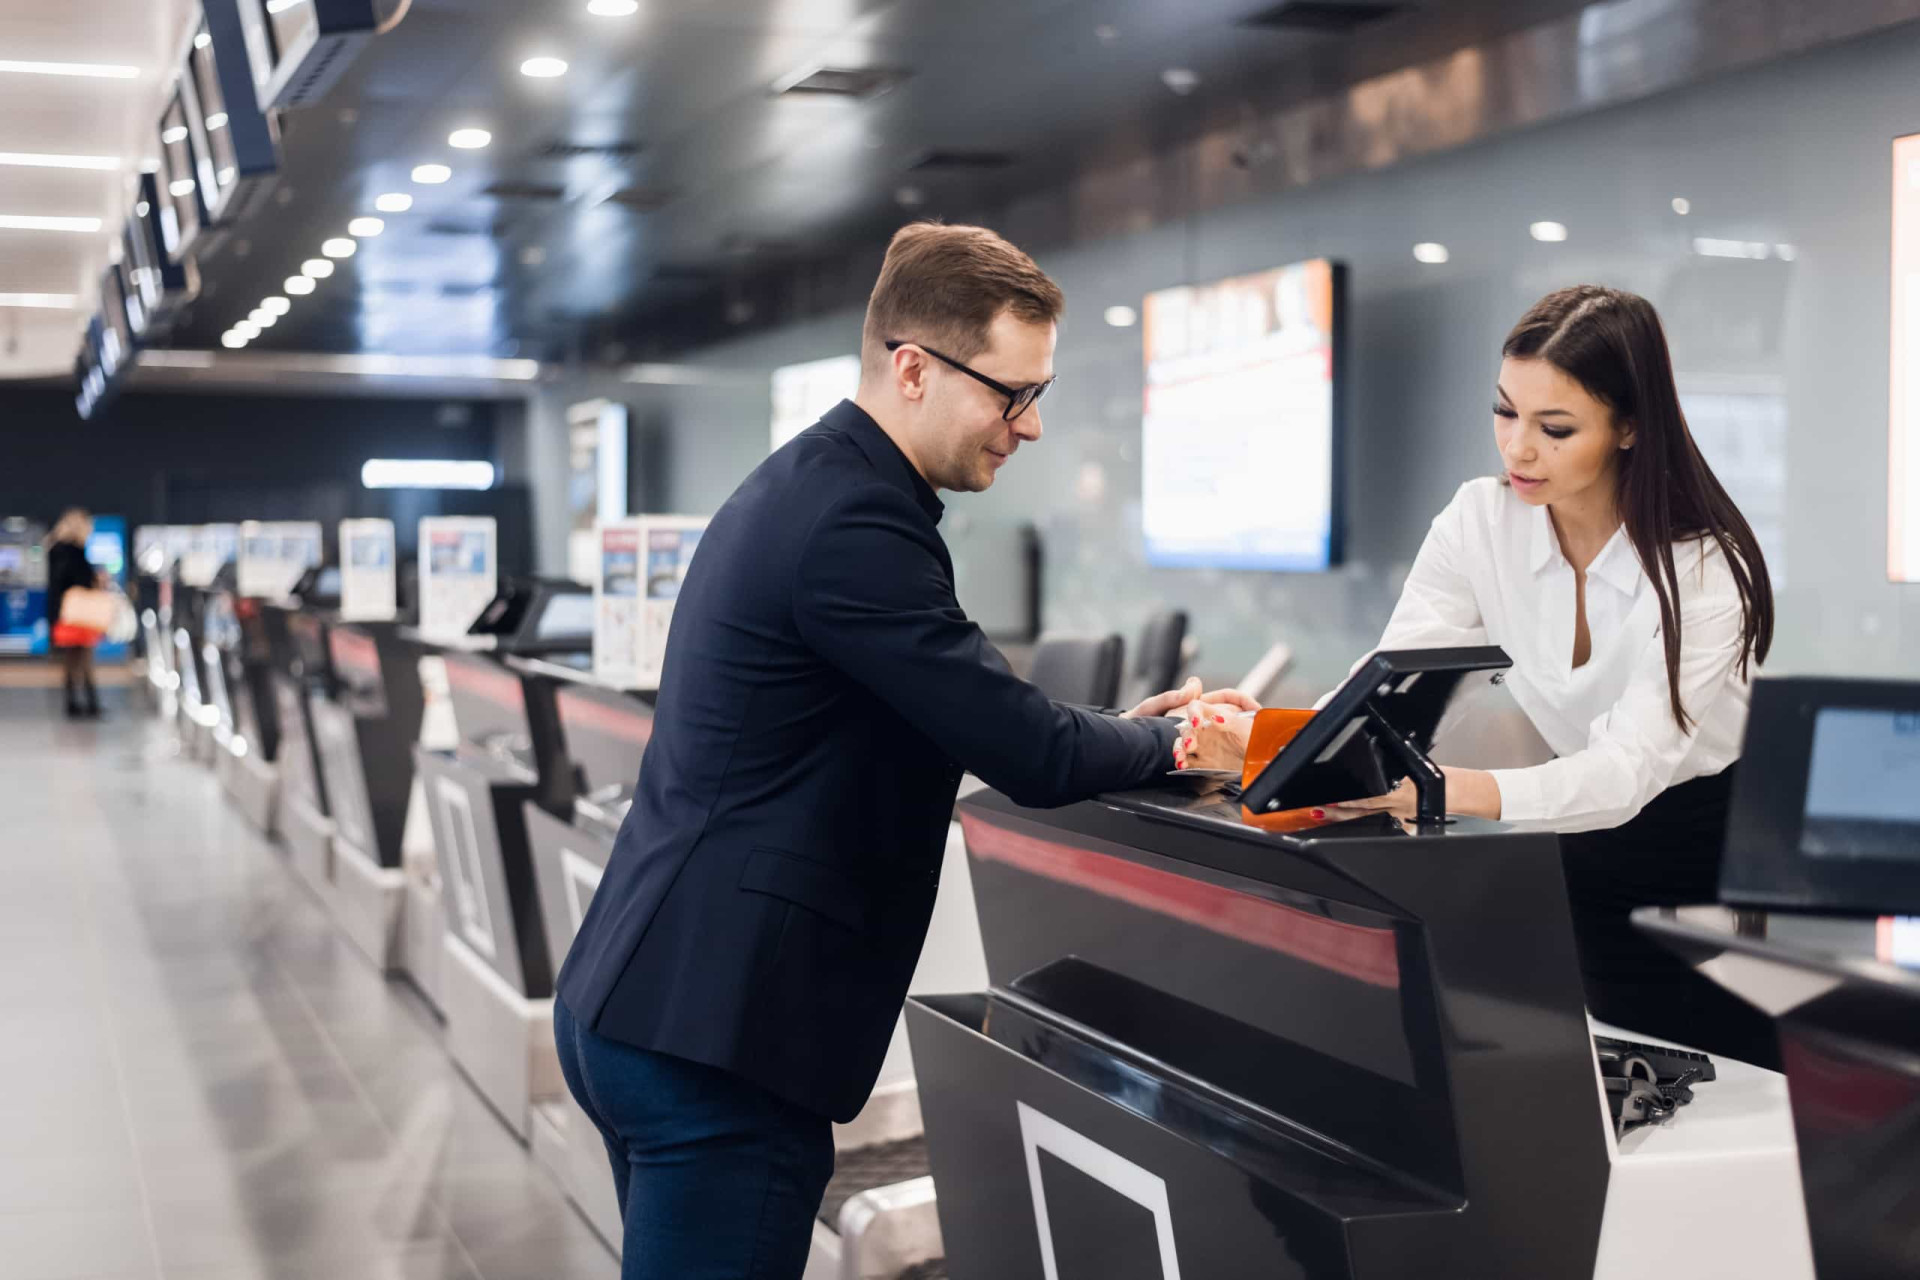 <p>This might be worth a go if you arrive early at the check-in. However, the odds of scoring a last-minute upgrade are better if you have elite status with the airline.</p><p>You may also like:<a href="https://www.starsinsider.com/n/182067?utm_source=msn.com&utm_medium=display&utm_campaign=referral_description&utm_content=500296v1en-us"> Aussie celebs born outside Australia</a></p>